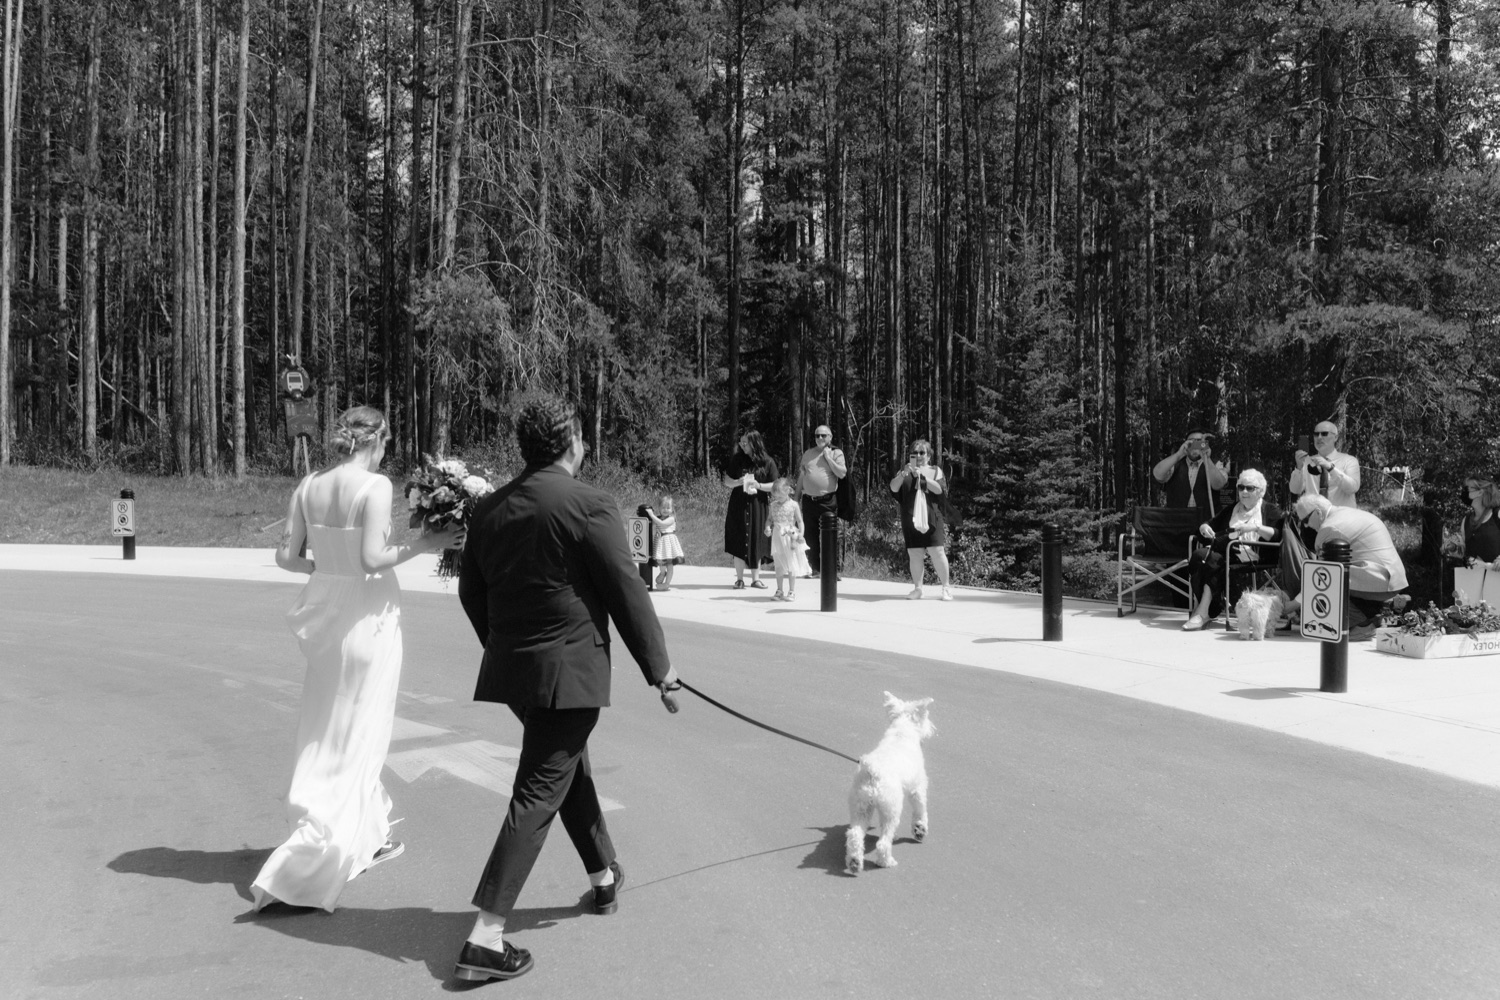 Couple wearing wedding clothes with their white dog on a leash walking towards their excited wedding guests